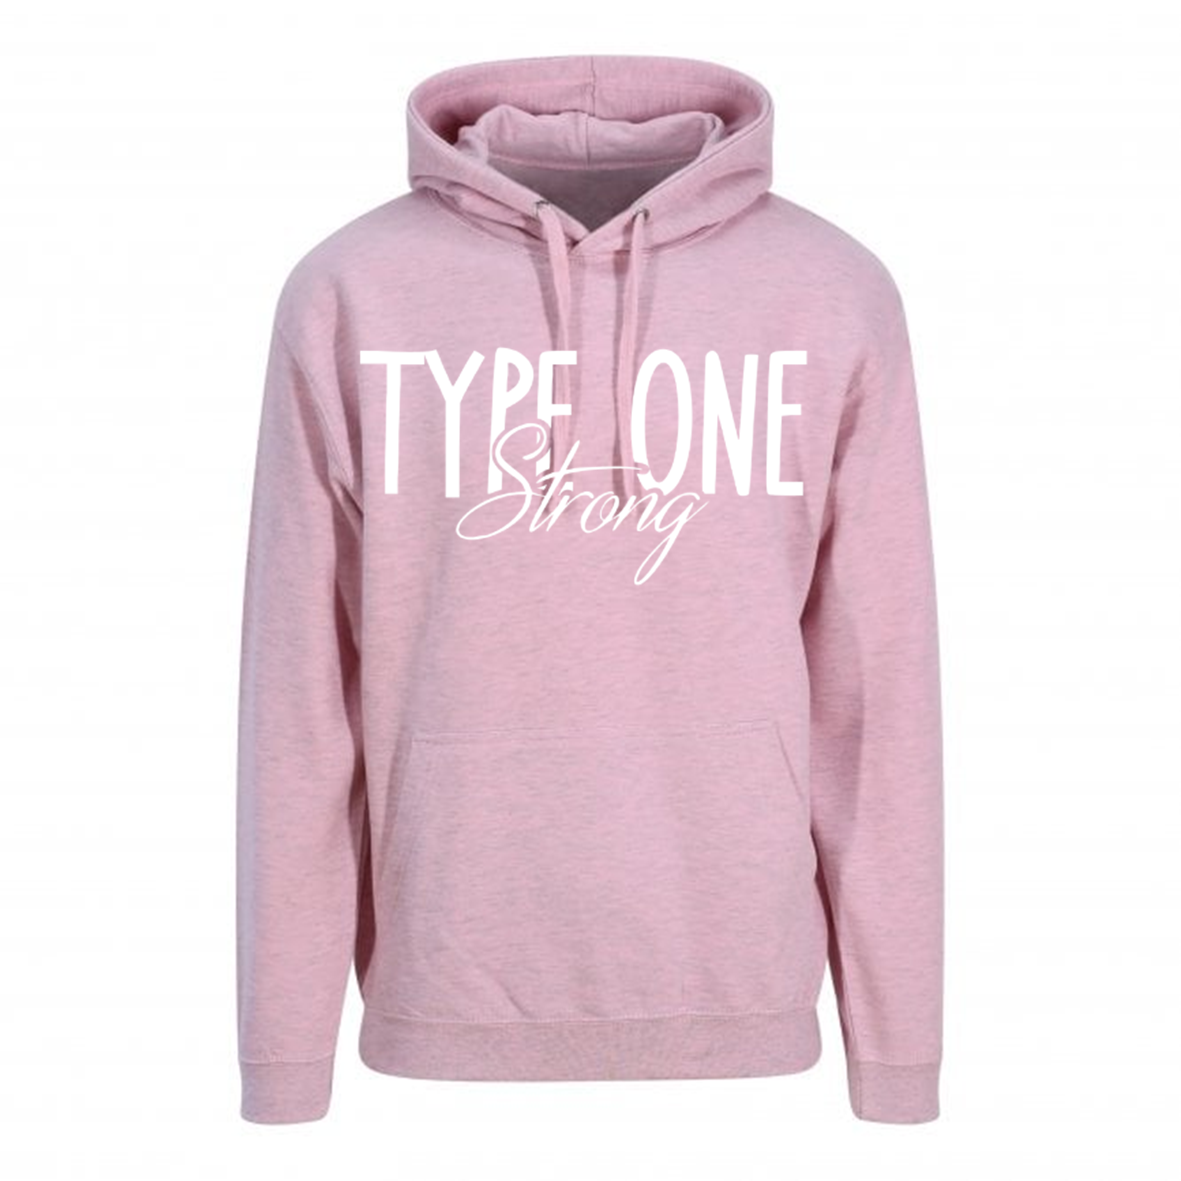 Type One Strong Pastel Hoodie